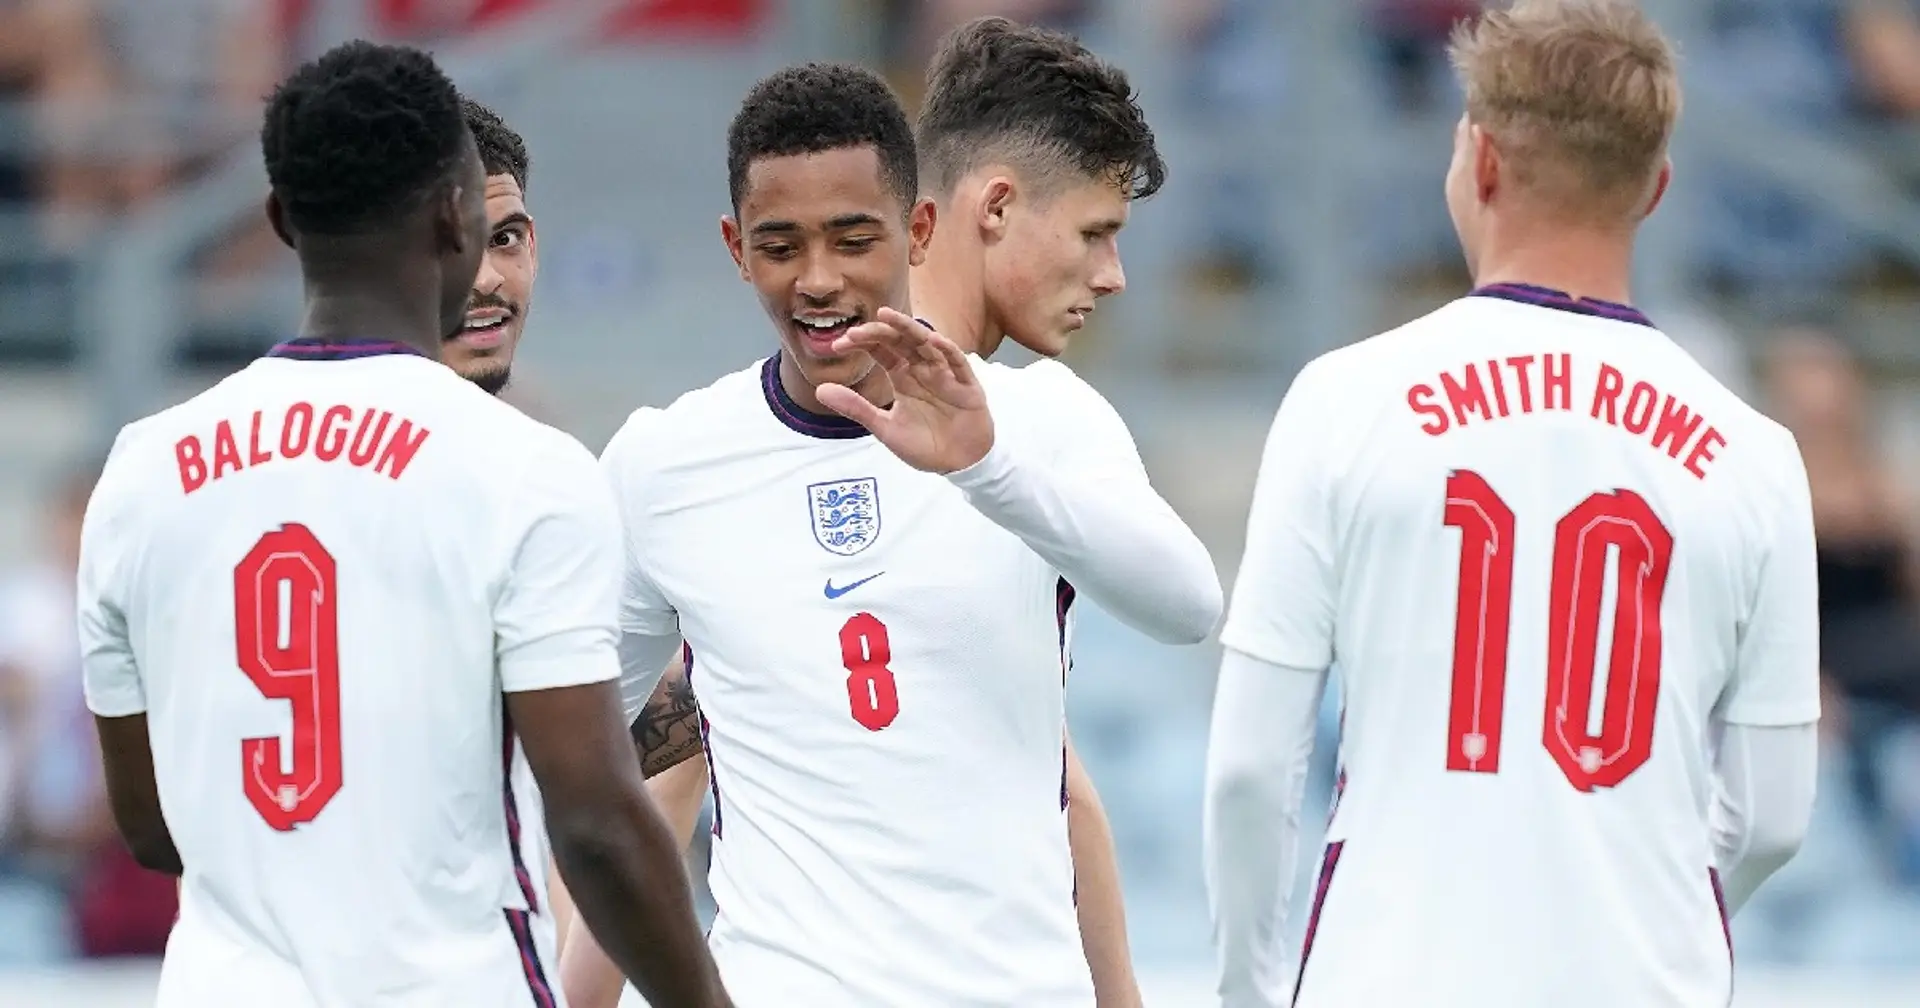 Balogun, Smith-Rowe called up to England under-21 squad 